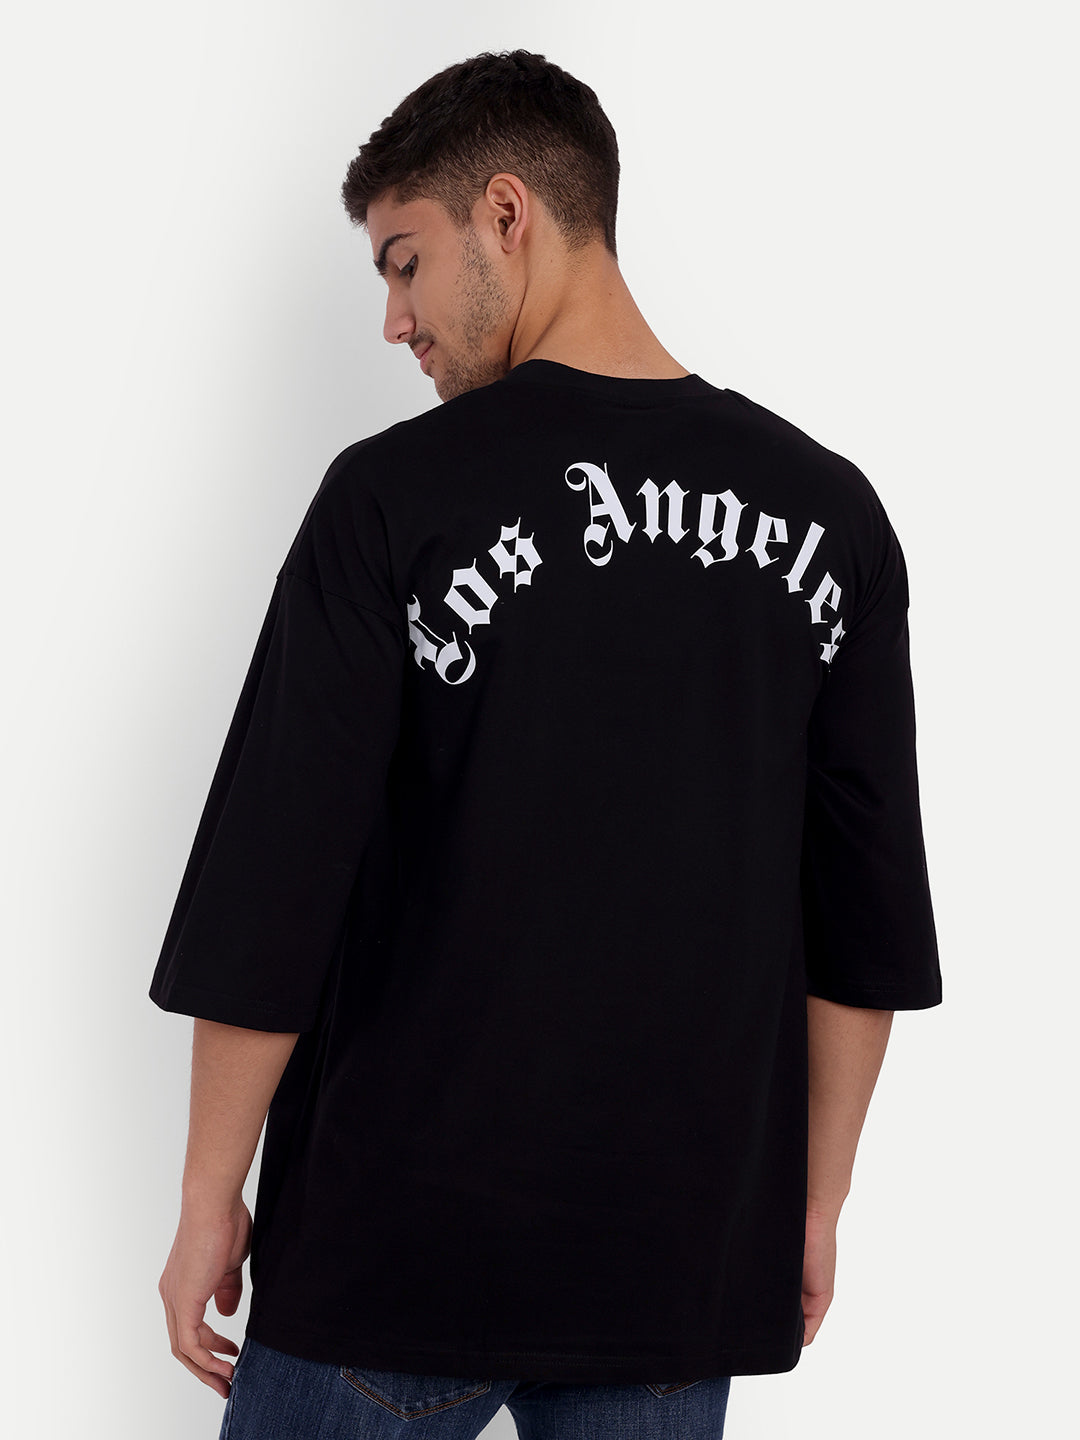 Los Angeles Black Drop-shoulder Oversized Tee by Stylo Fashion